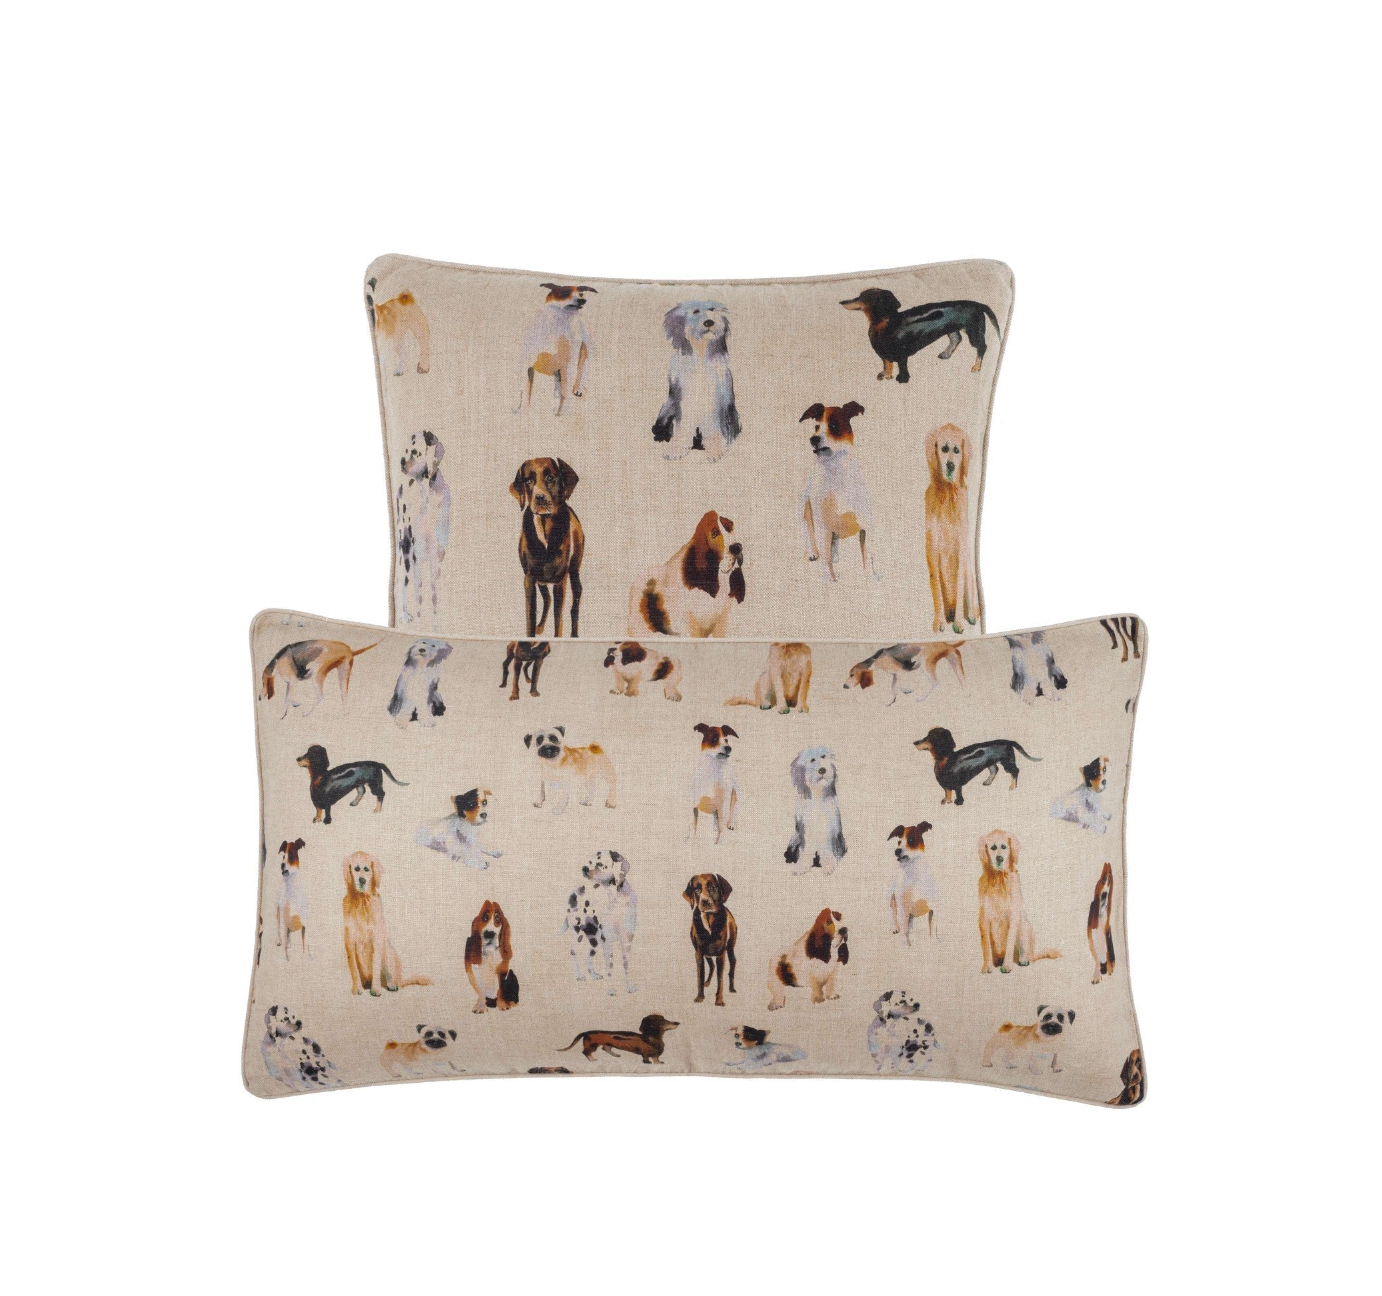 The Pup Pack Pillow